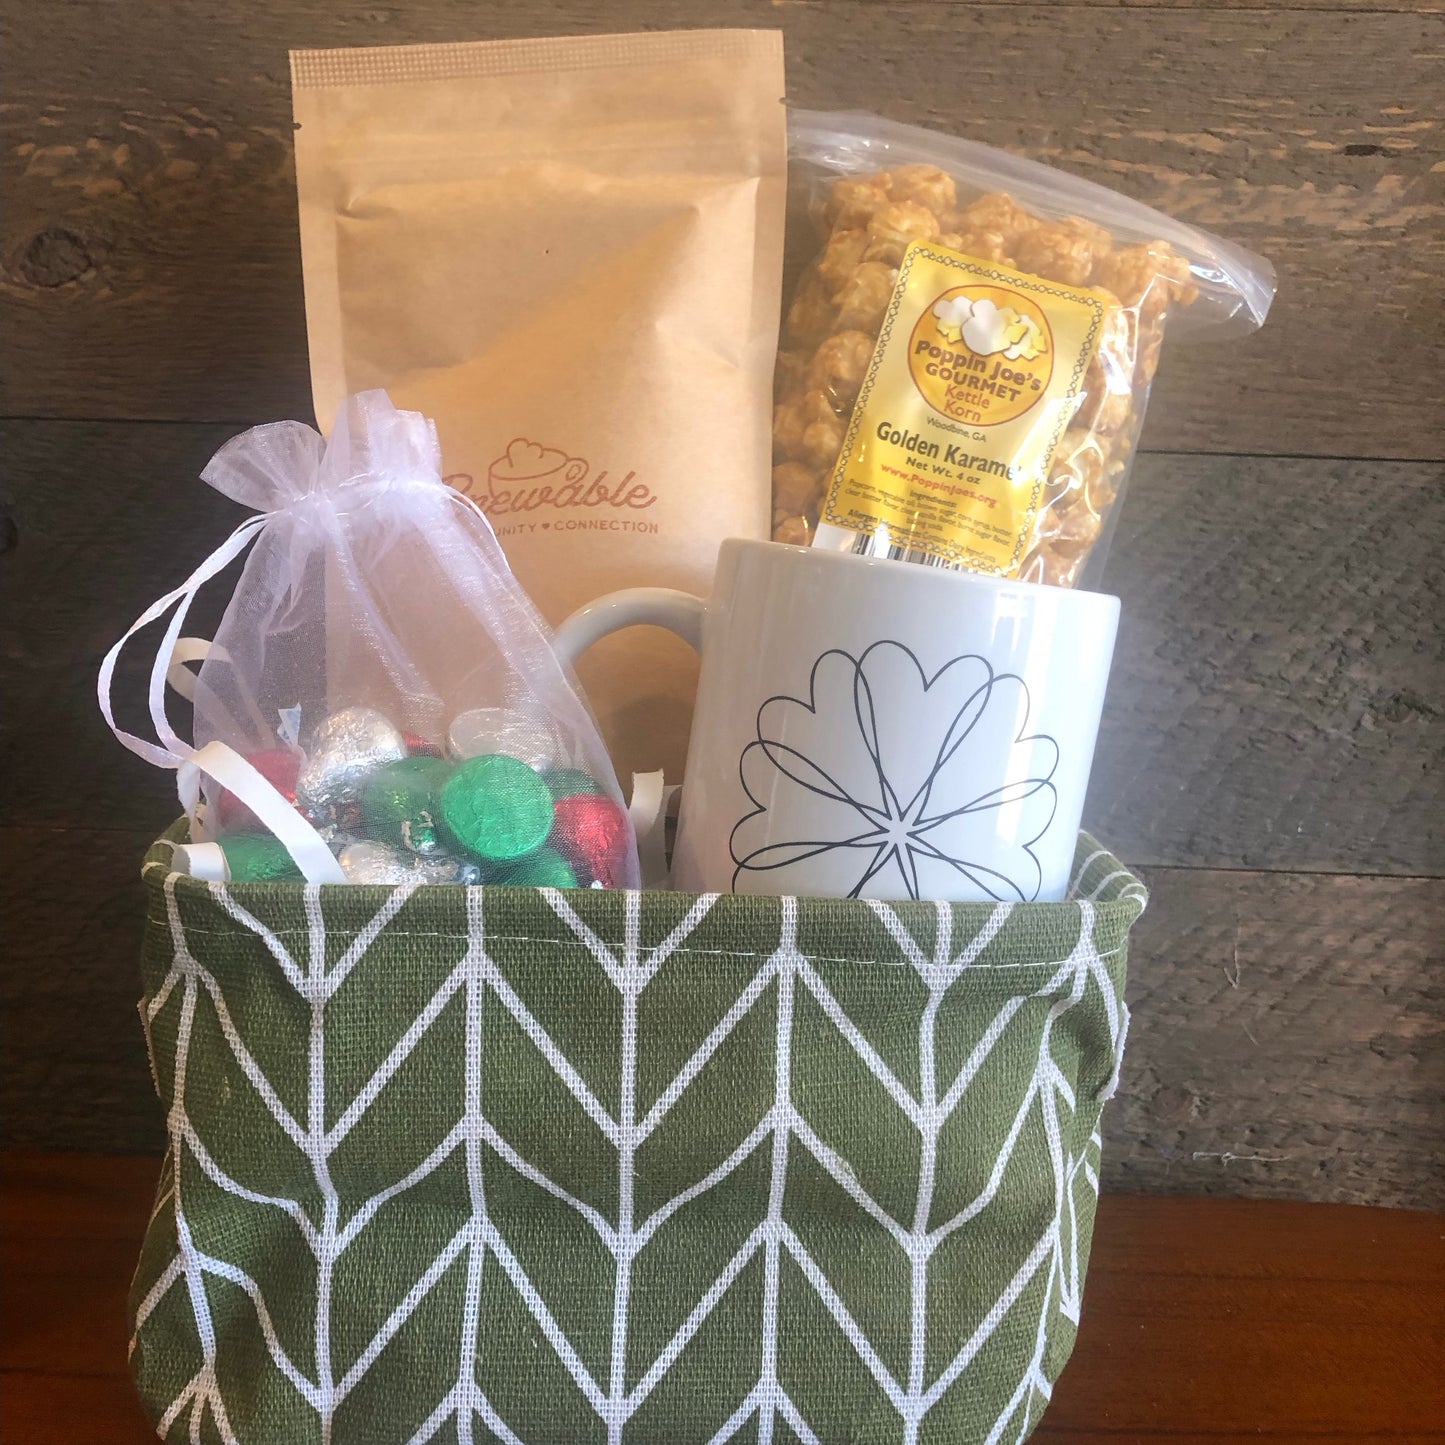 Holiday Edition: "Just Because" Basket